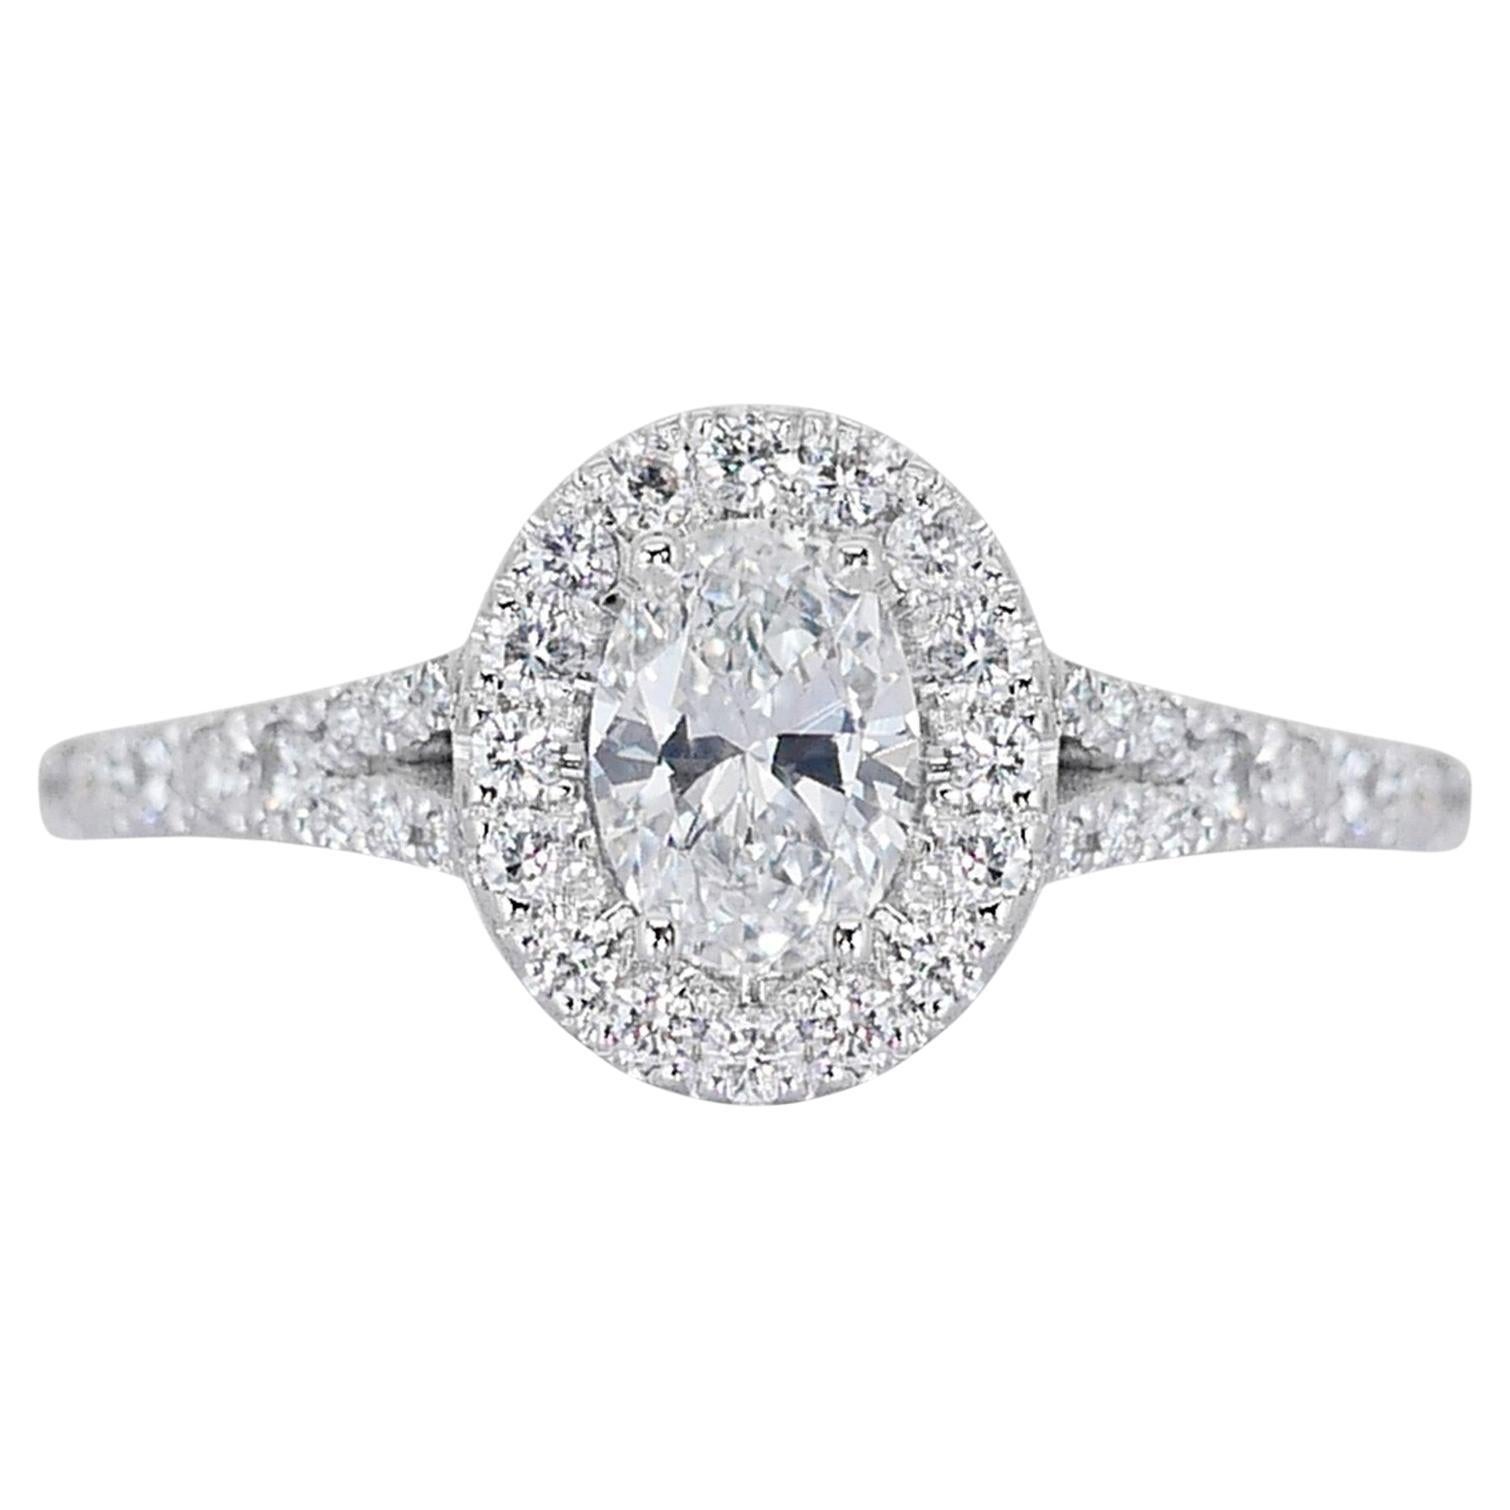 Exquisite 1.04ct Oval Diamond Halo Ring in 18k White Gold - GIA Certified For Sale